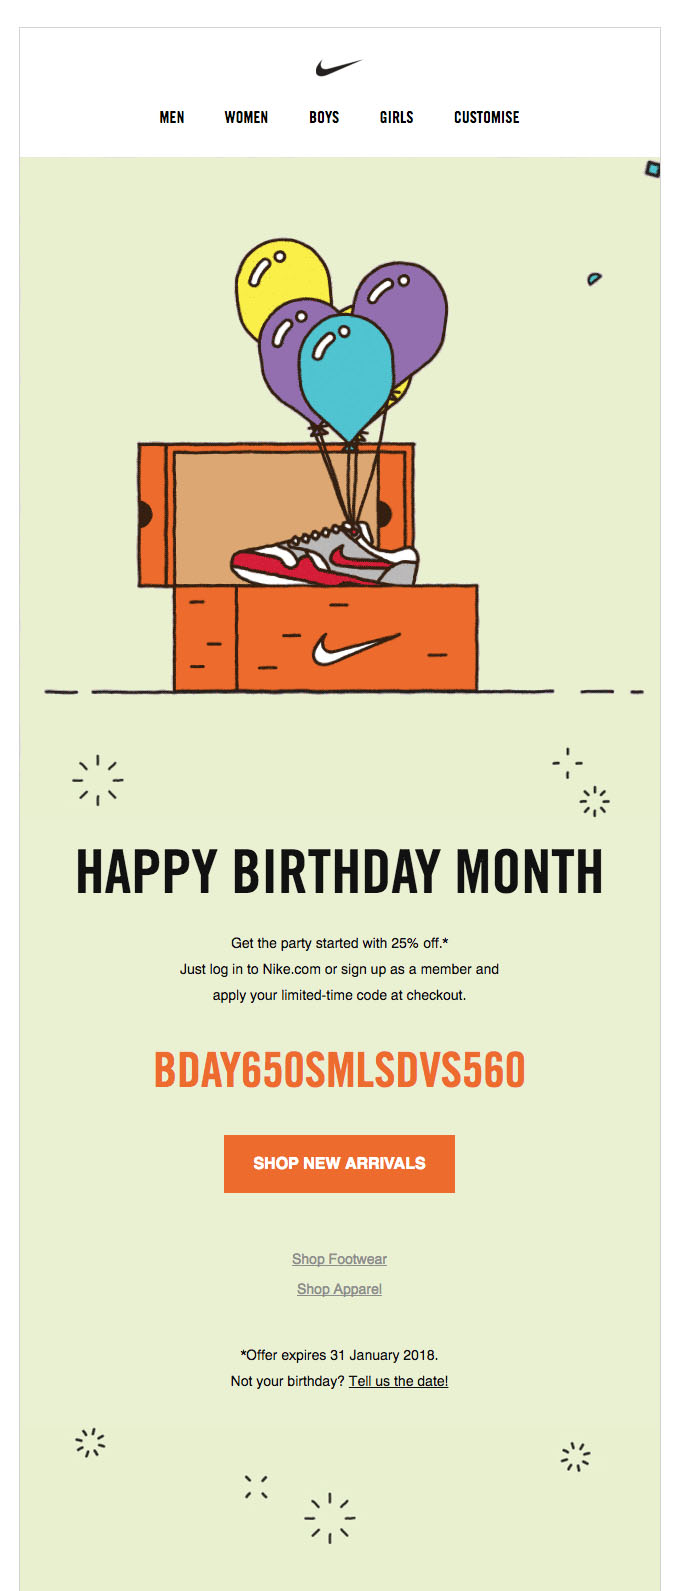 Promotional Emails - Birthday Email Example - Nike